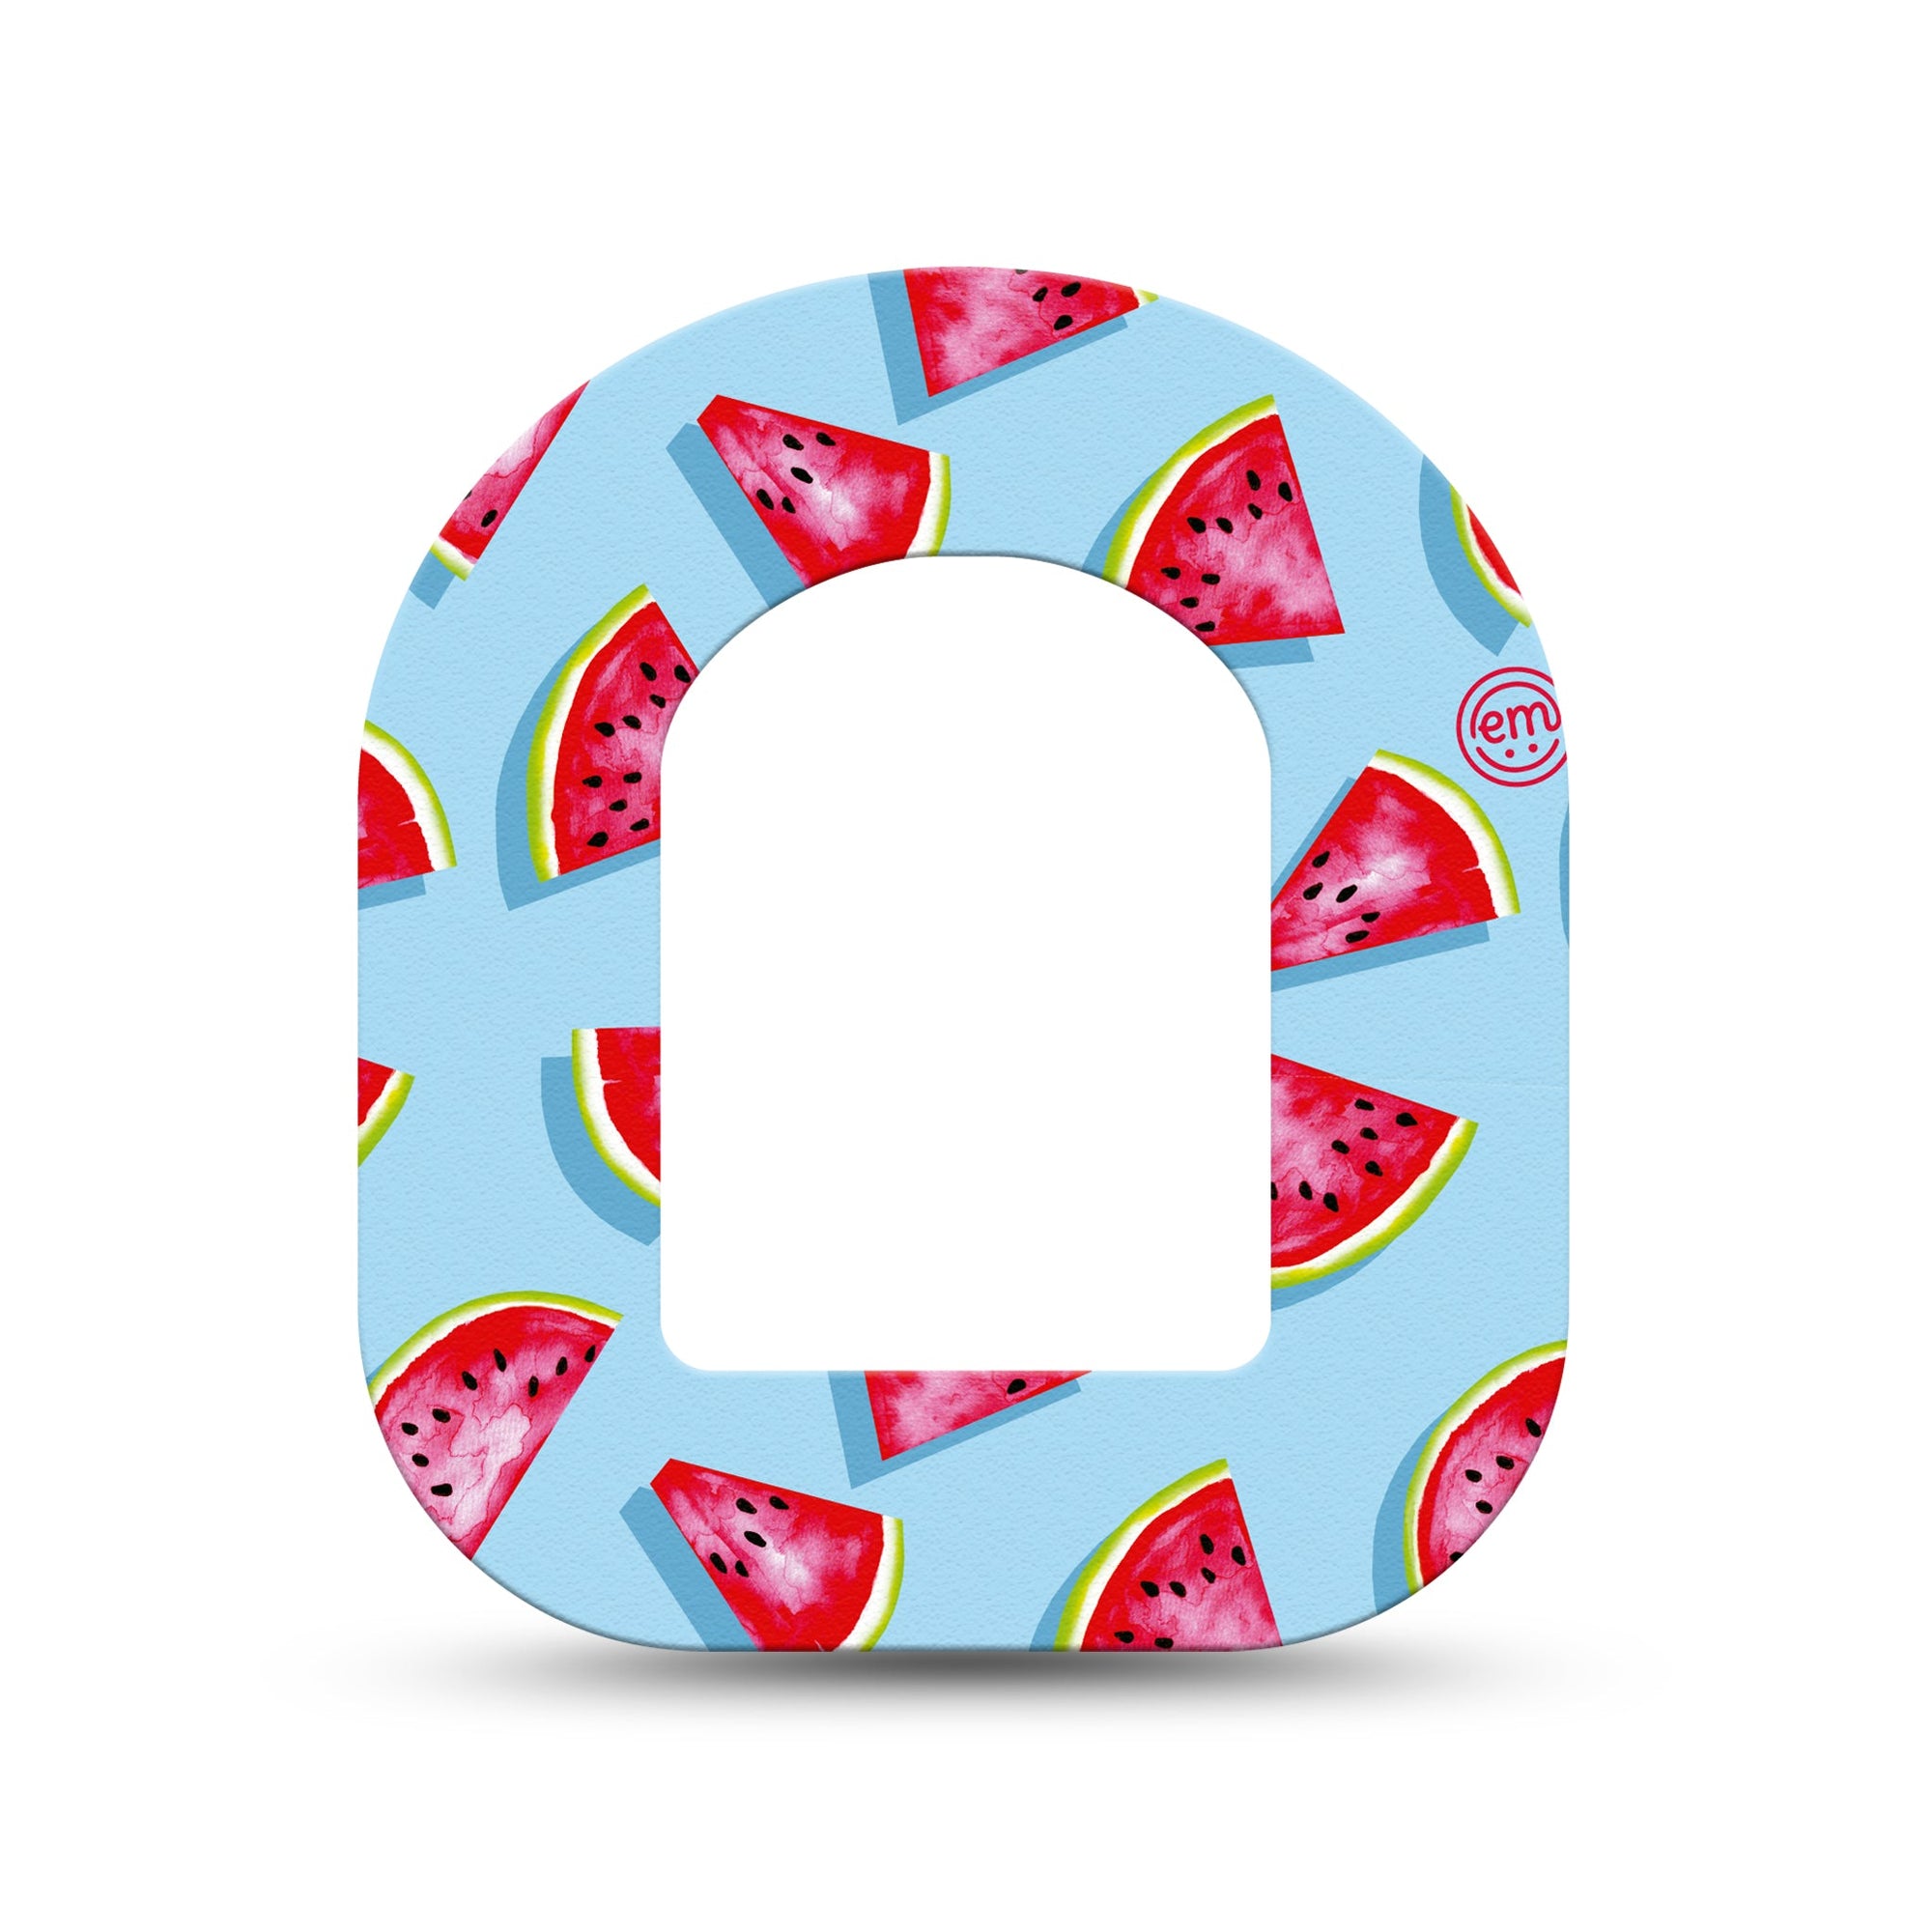 ExpressionMed Watermelon Slices Pod Mini Tape Single, Juicy Fruit Adhesive Patch Pump Design